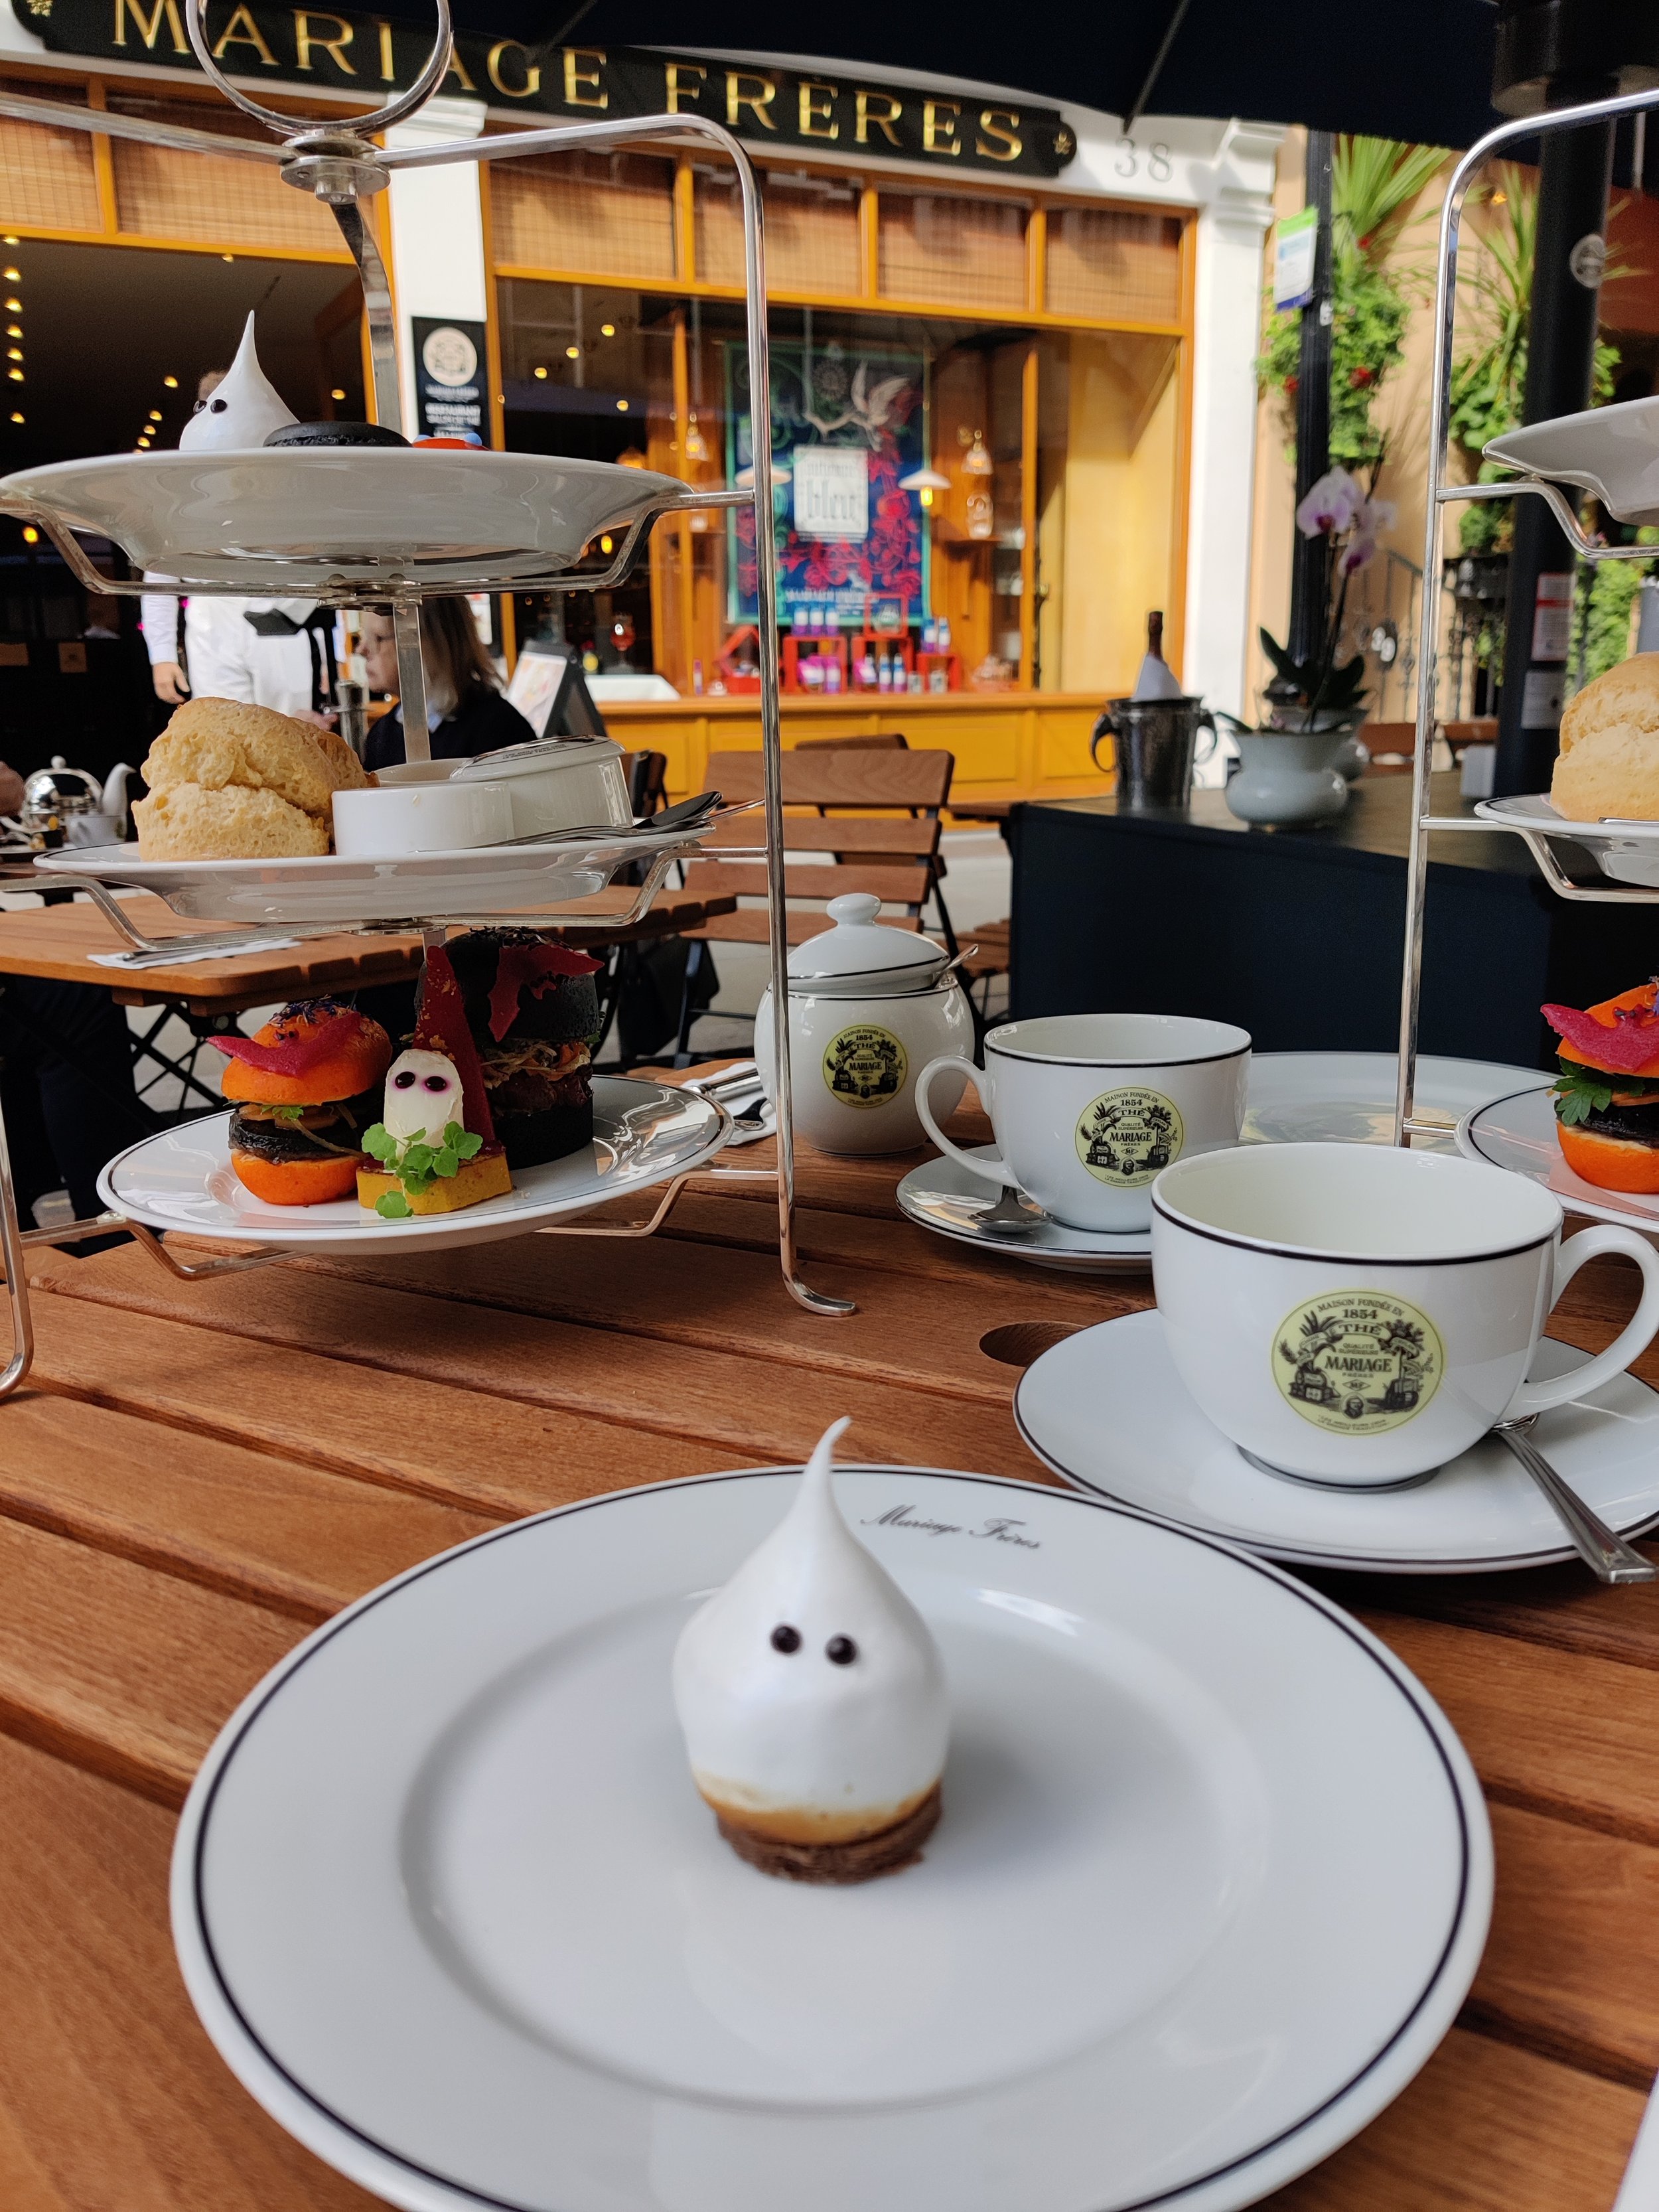 Mariage Frères lauches spook-tacular Halloween Afternoon Tea — Warm Welcome  Magazine